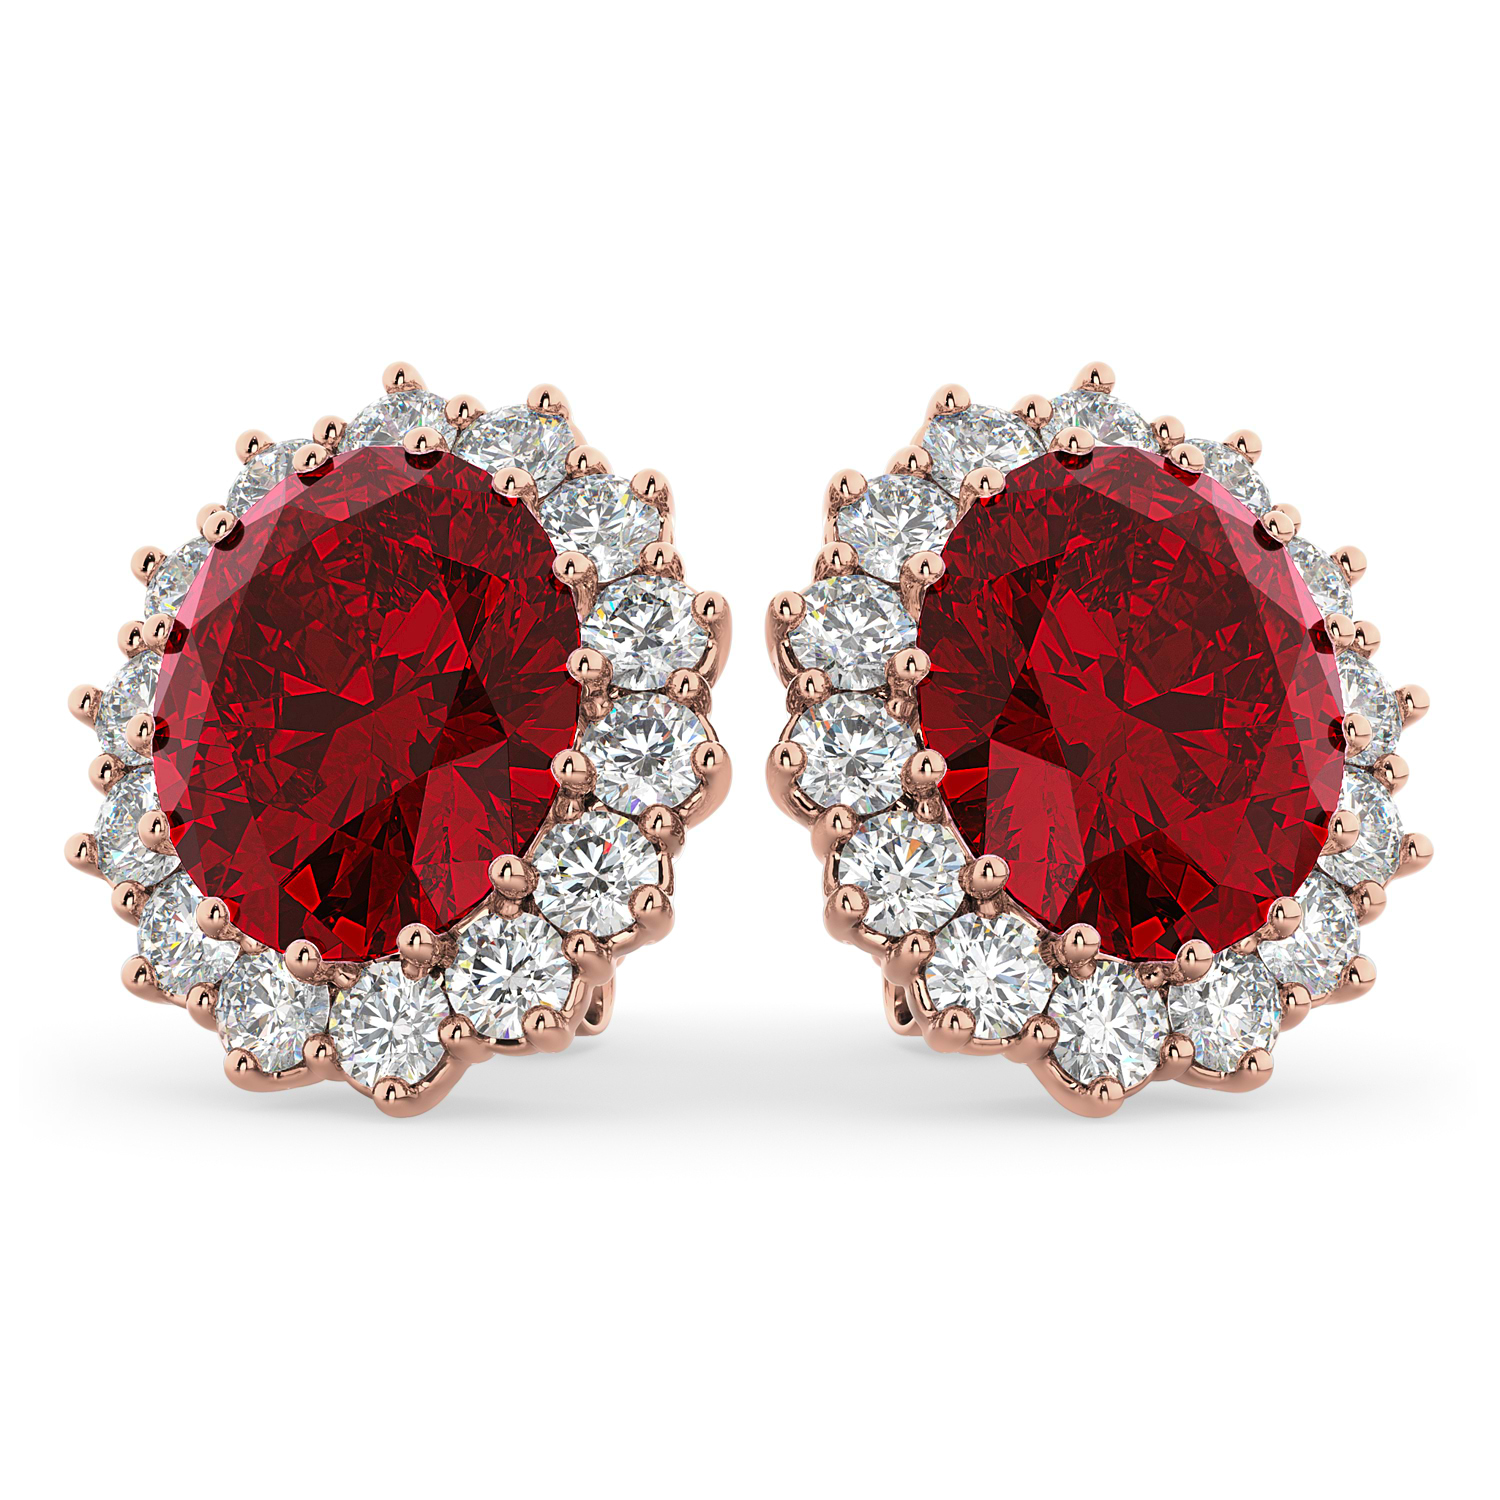 Oval Lab Ruby and Diamond Earrings 14k Rose Gold (10.80ctw)